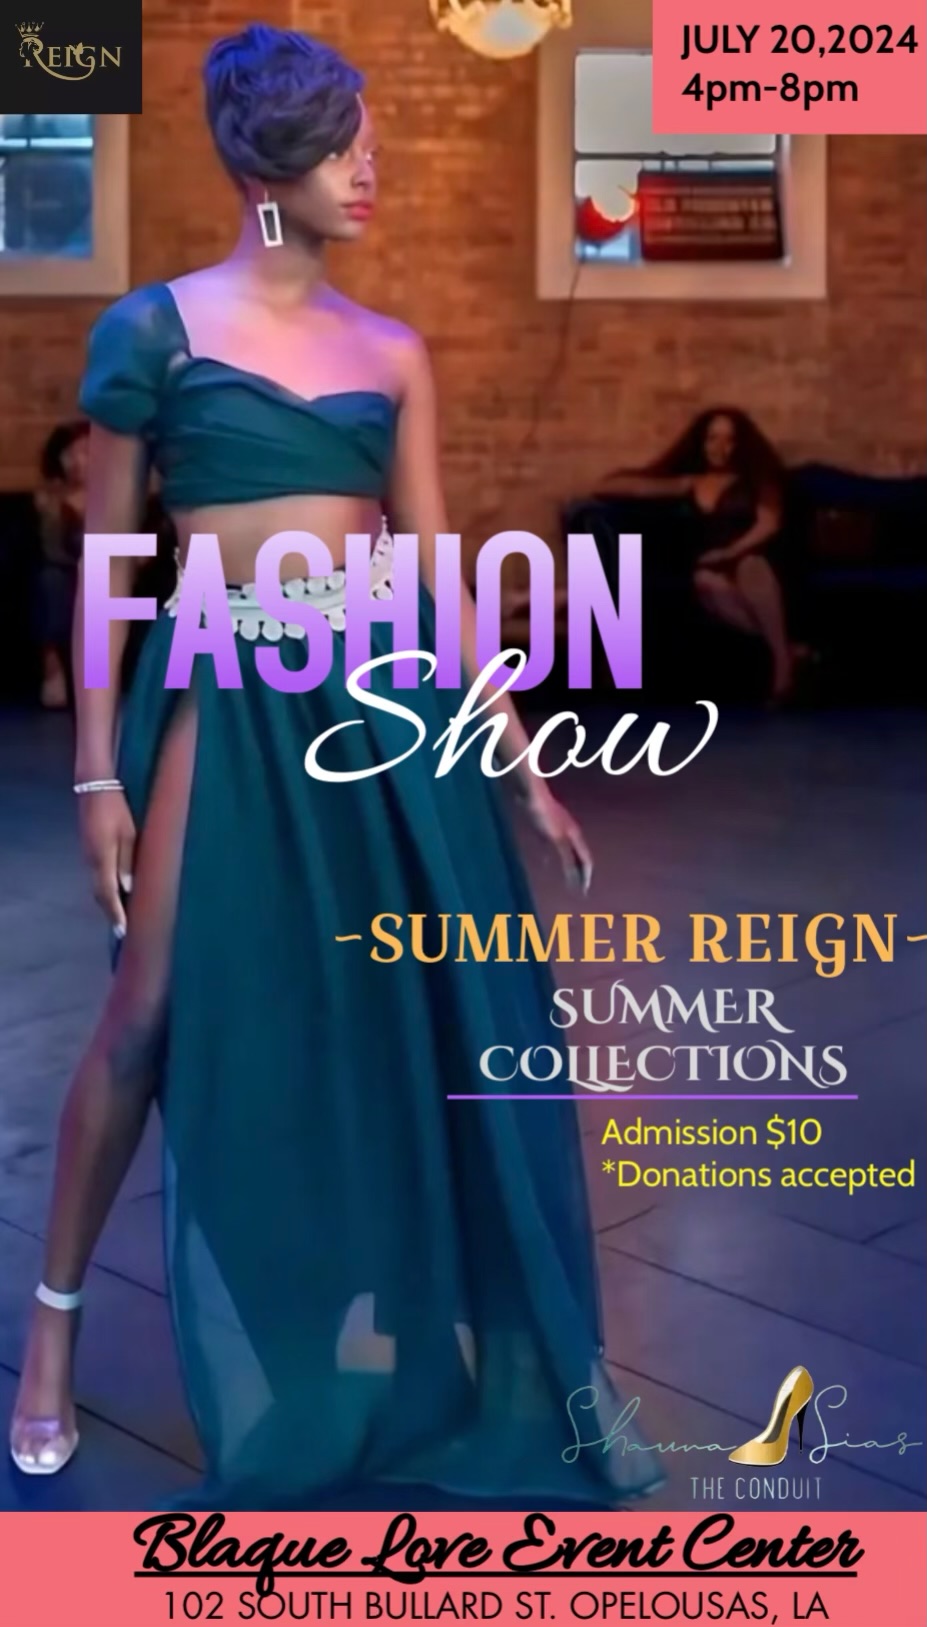 2024 Reign Fashion Show - Summer Reign Collection